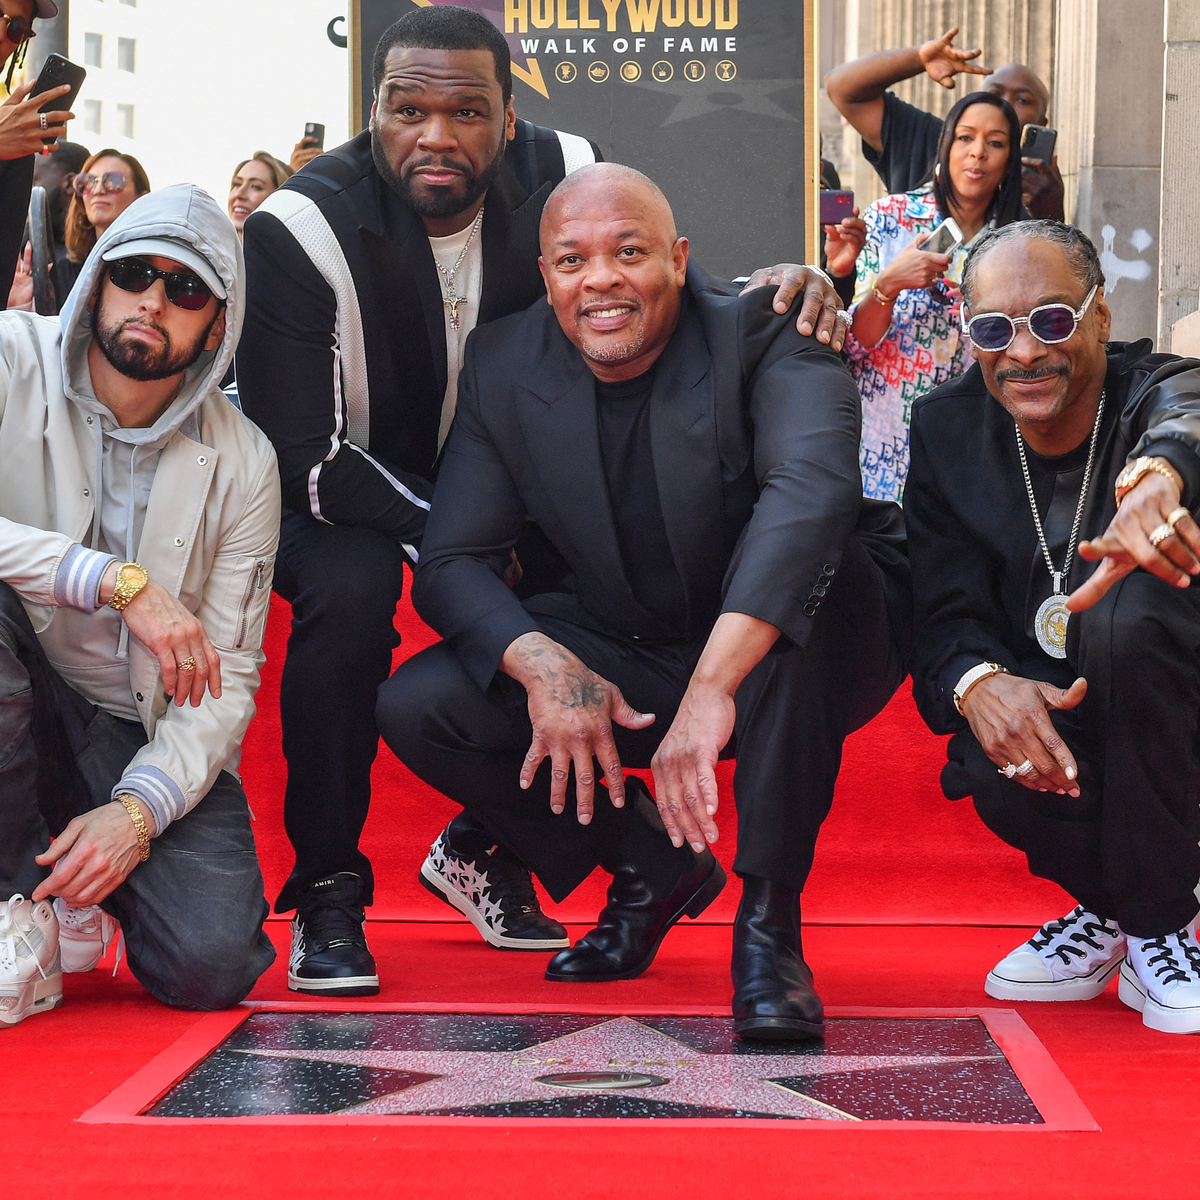 Lose Yourself Over Eminem's Reunion With Snoop Dogg and 50 Cent at Dr. Dre's Walk of Fame Ceremony